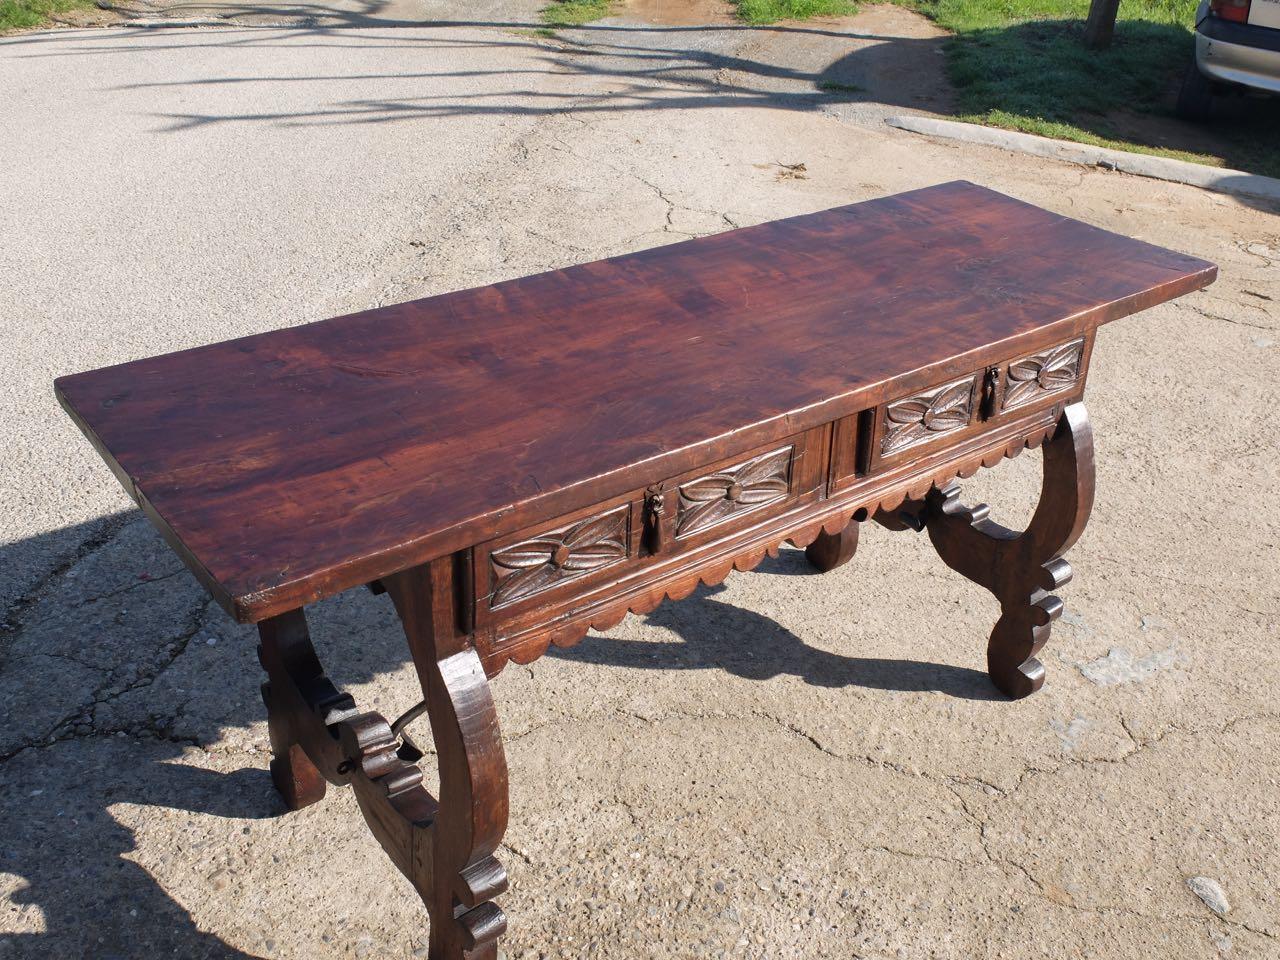 This beautifully crafted mid-19th century poplar library table was found in the village of Vullpellach, located in the province of Girona's Costa Brava region of Catalonia, Spain.

Featuring a single board 1 3/8